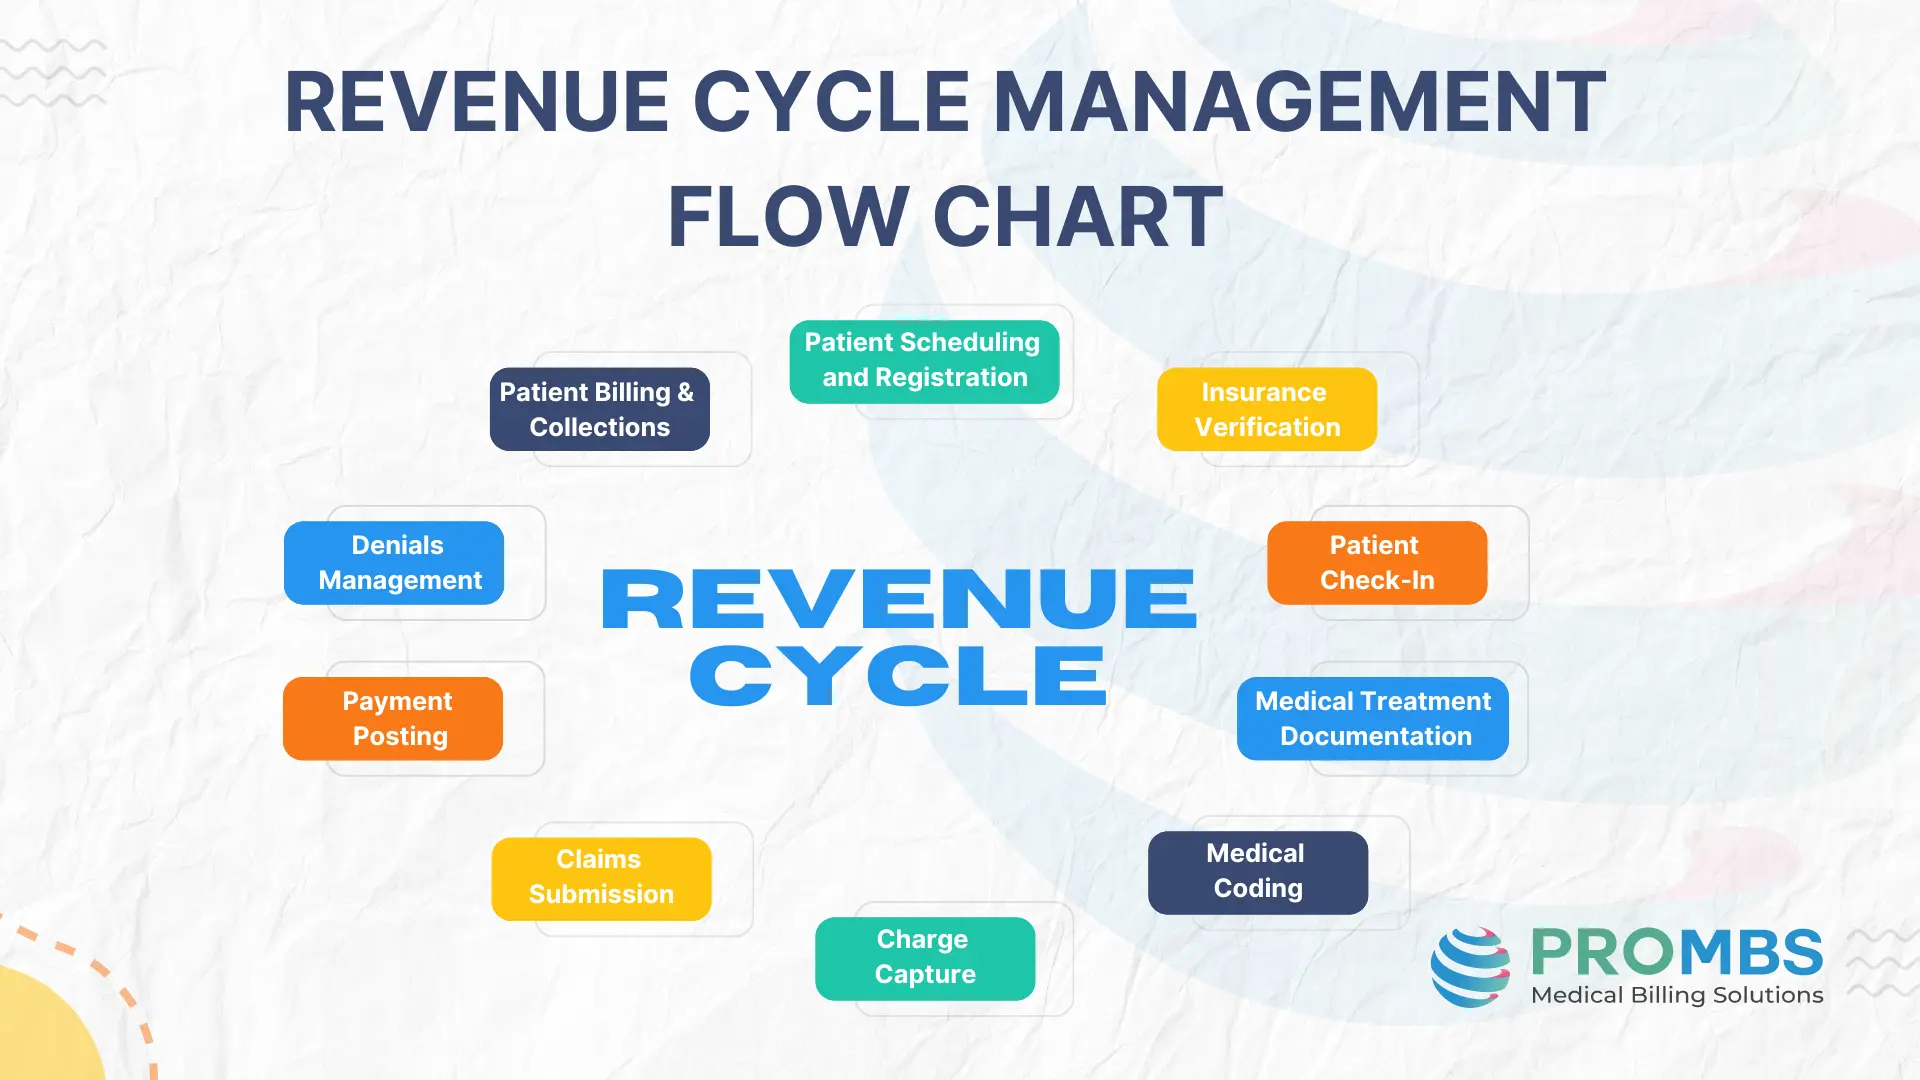 The image is a flow chart titled "Revenue Cycle Management Flow Chart" created by Pro Medical Billing Solutions LLC. The flow chart includes the RCM steps